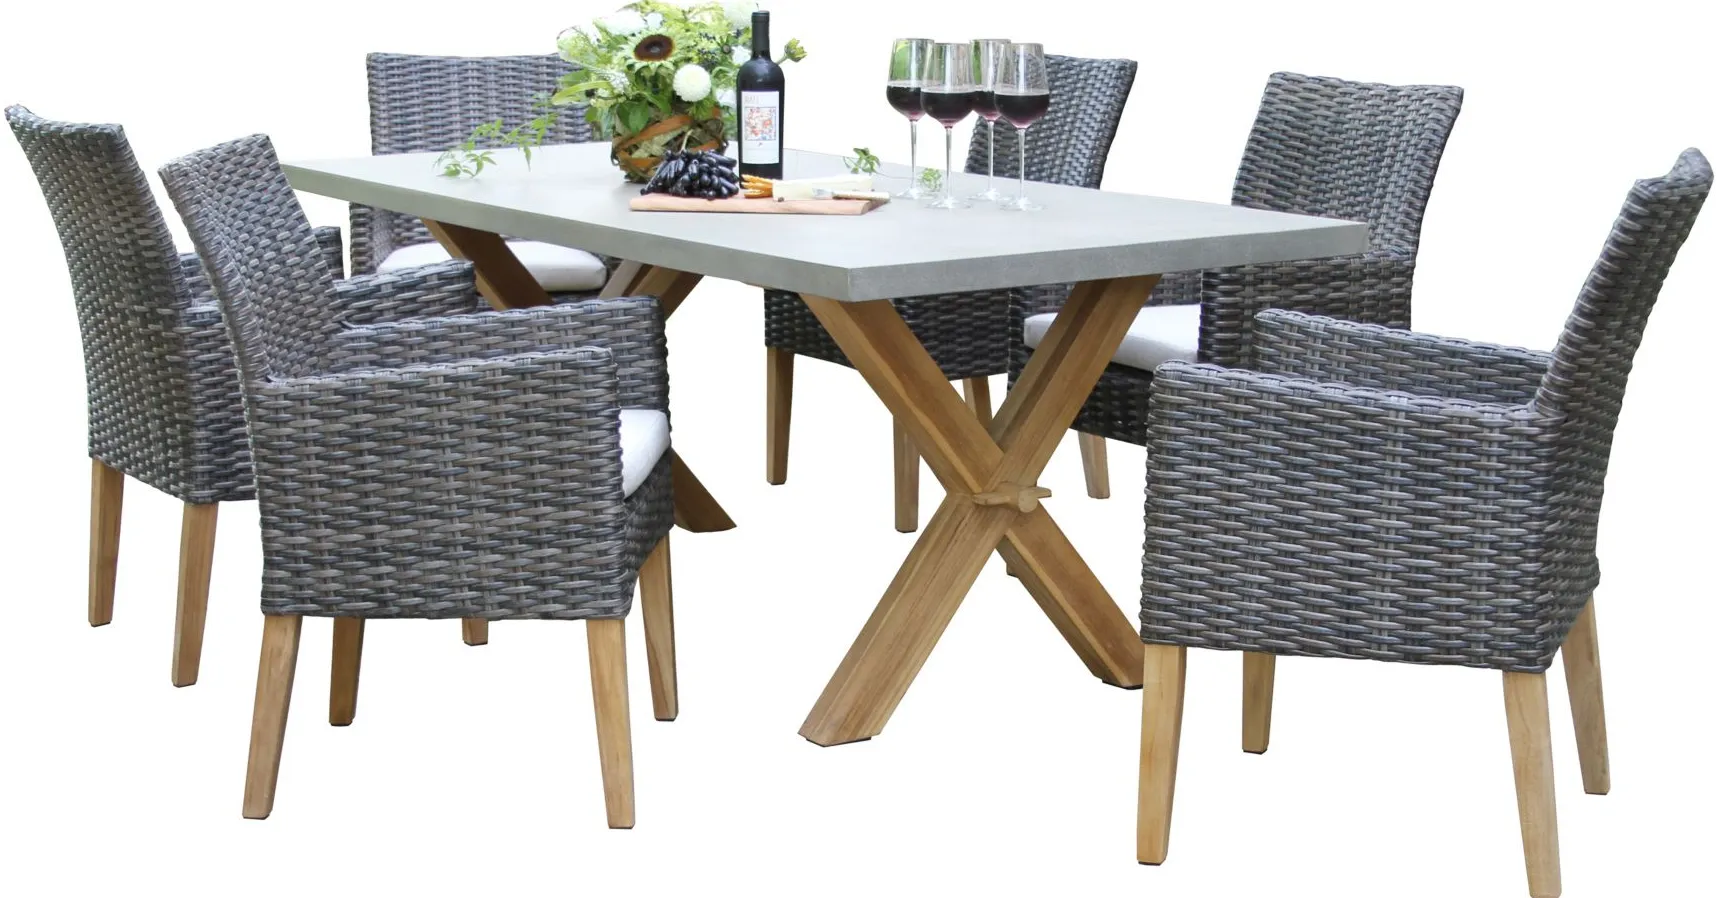 Cagle Outdoor 7-pc Table Set in Stone by Outdoor Interiors